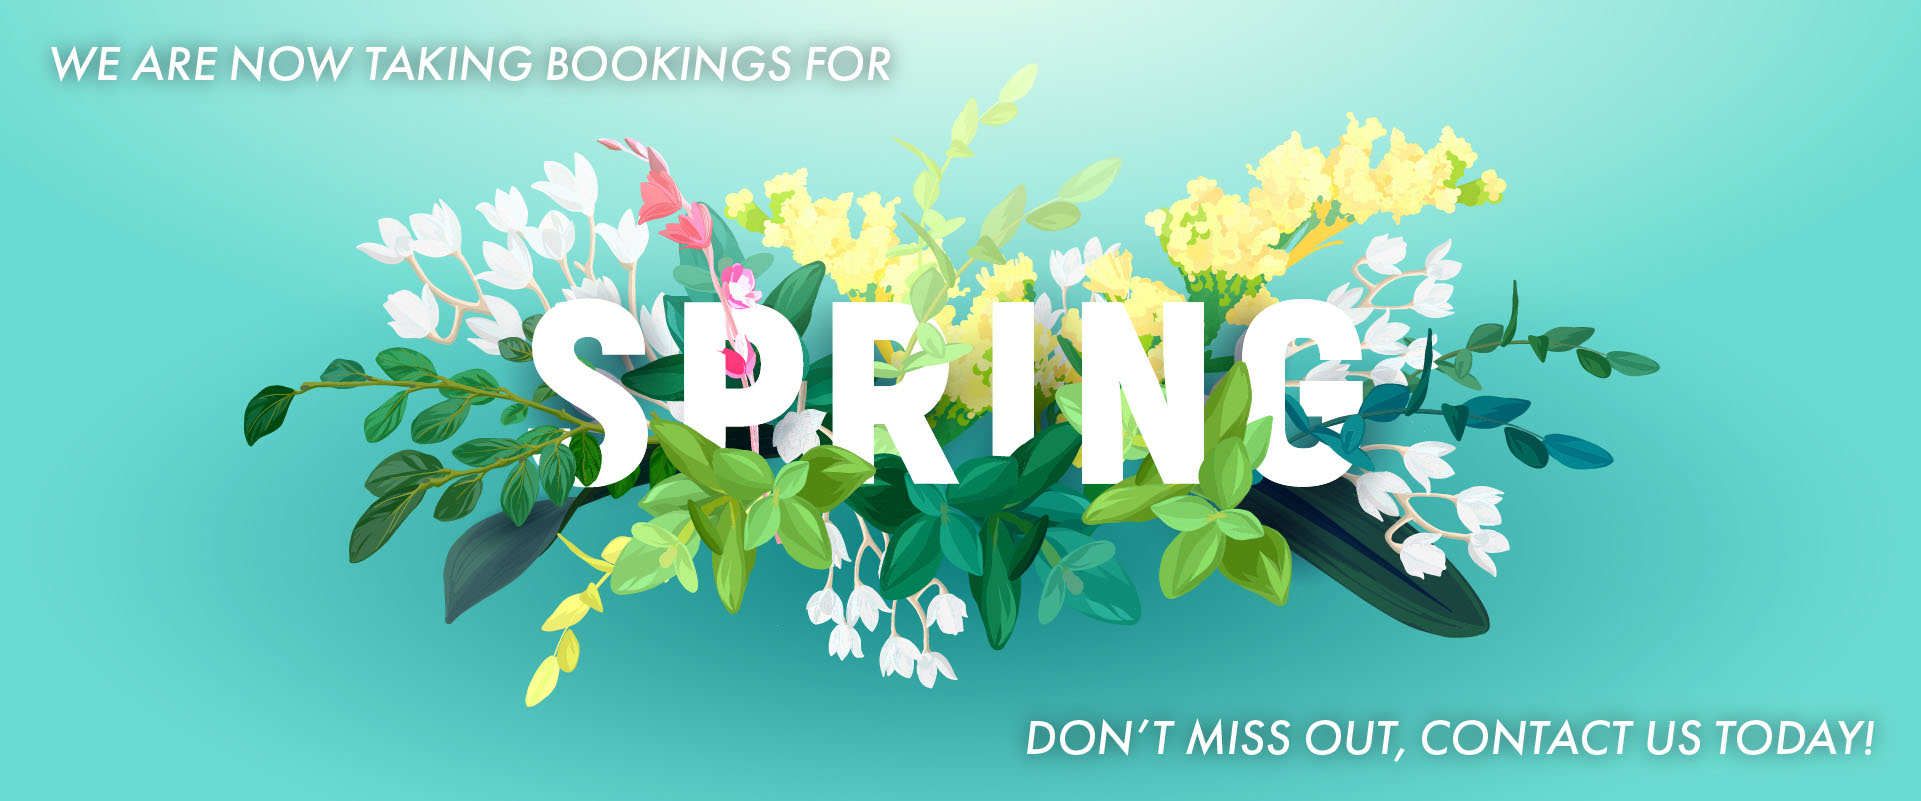 mdc-specialists-spring-banner-2